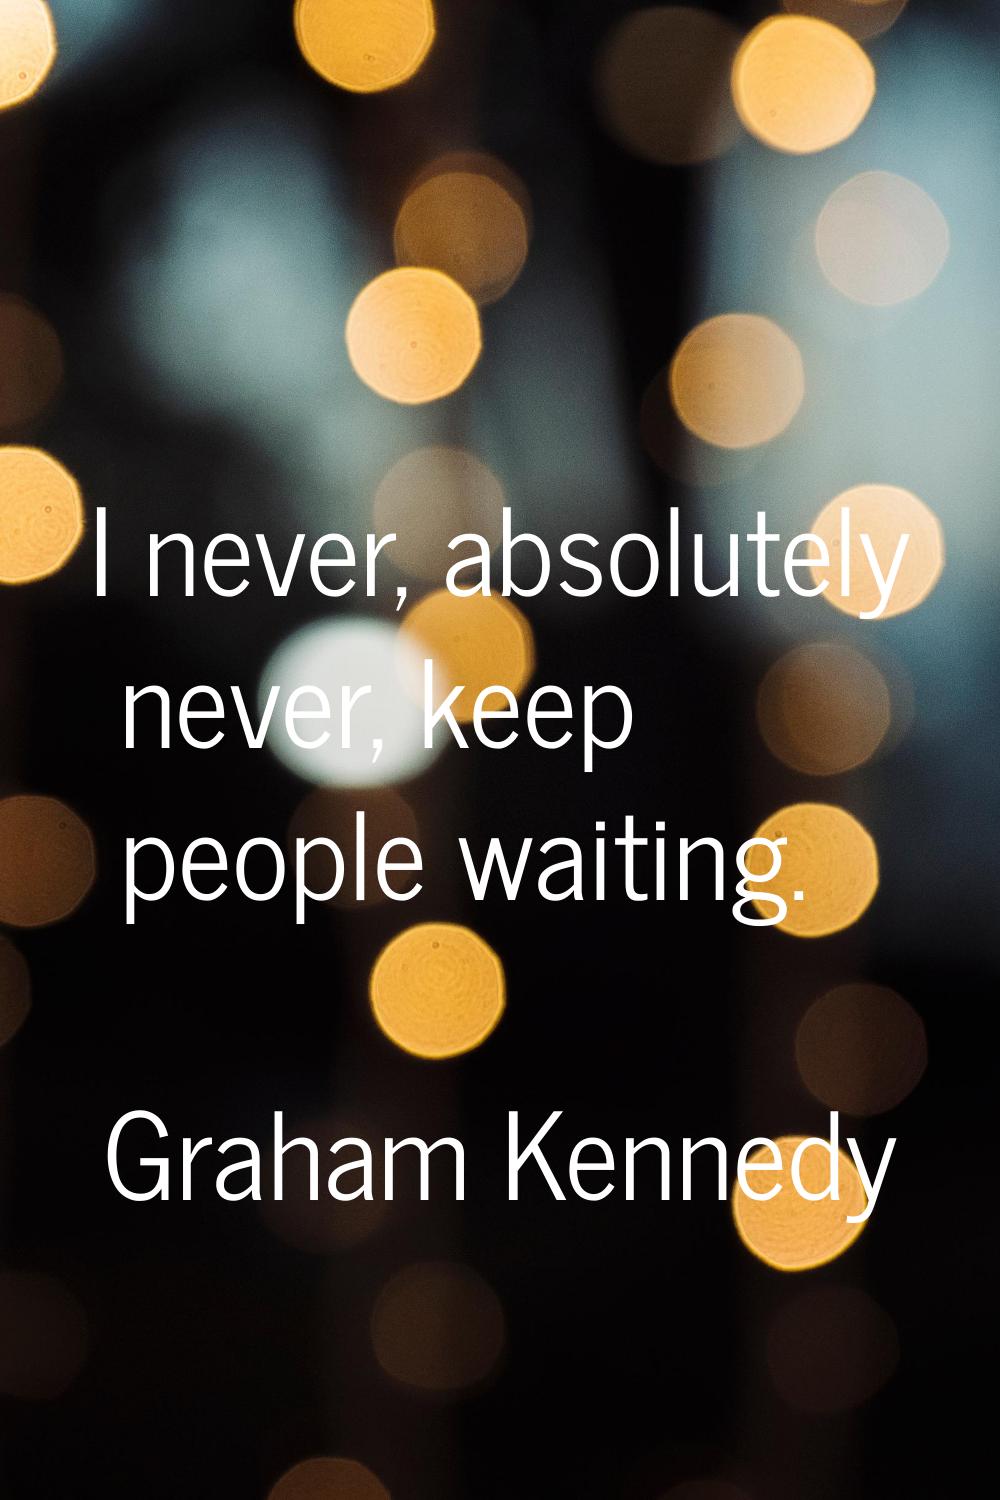 I never, absolutely never, keep people waiting.